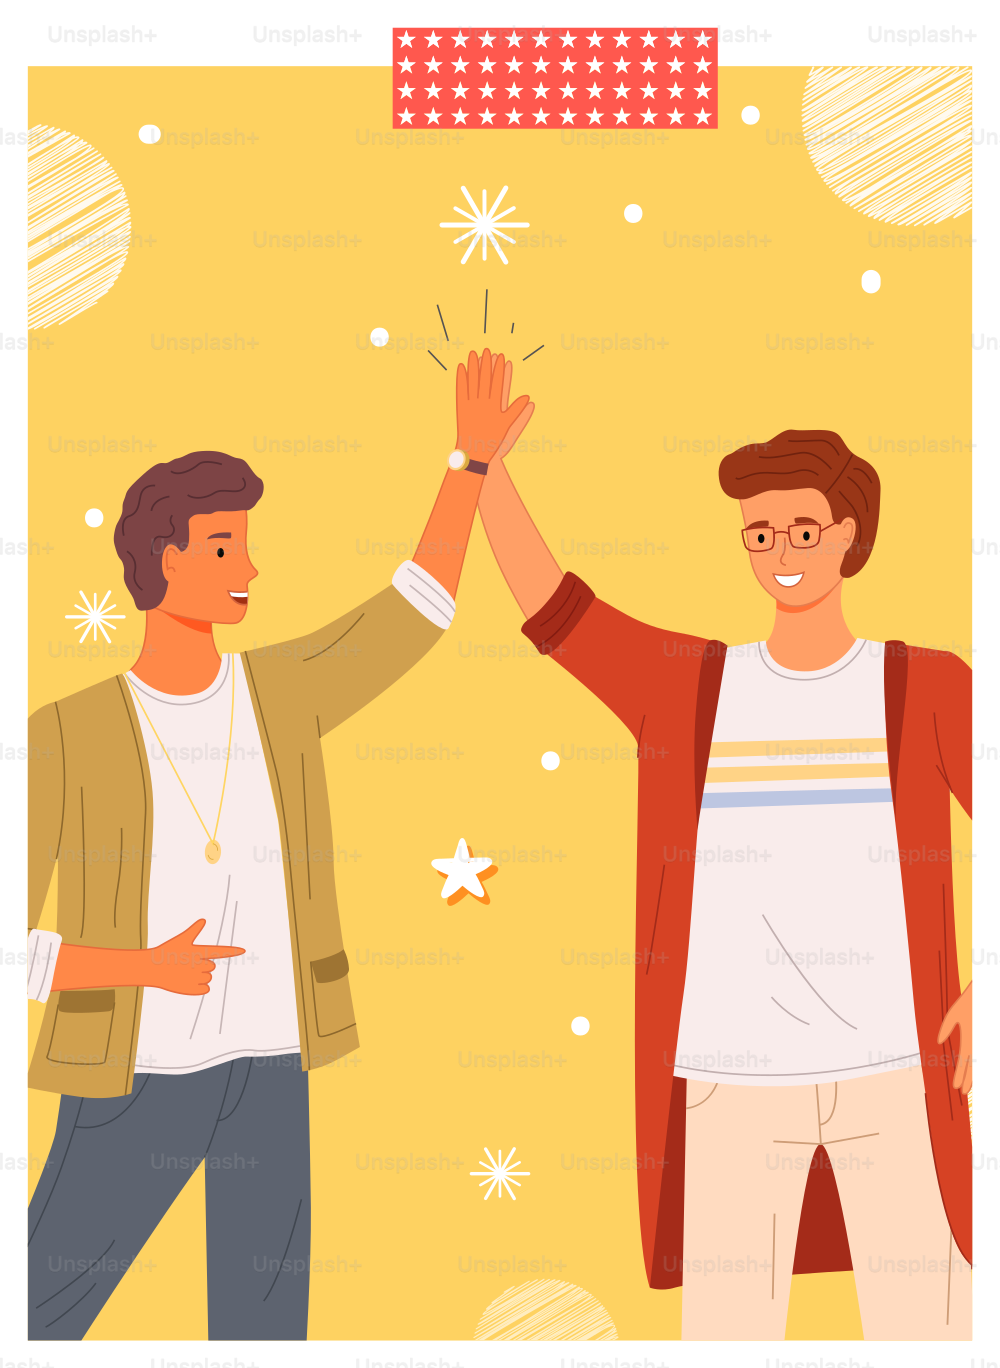 Two people giving high five, standing happily with hands together. Smiling men greeting each other. Male characters give five and rejoice. Happy guys during greeting isolated on white background